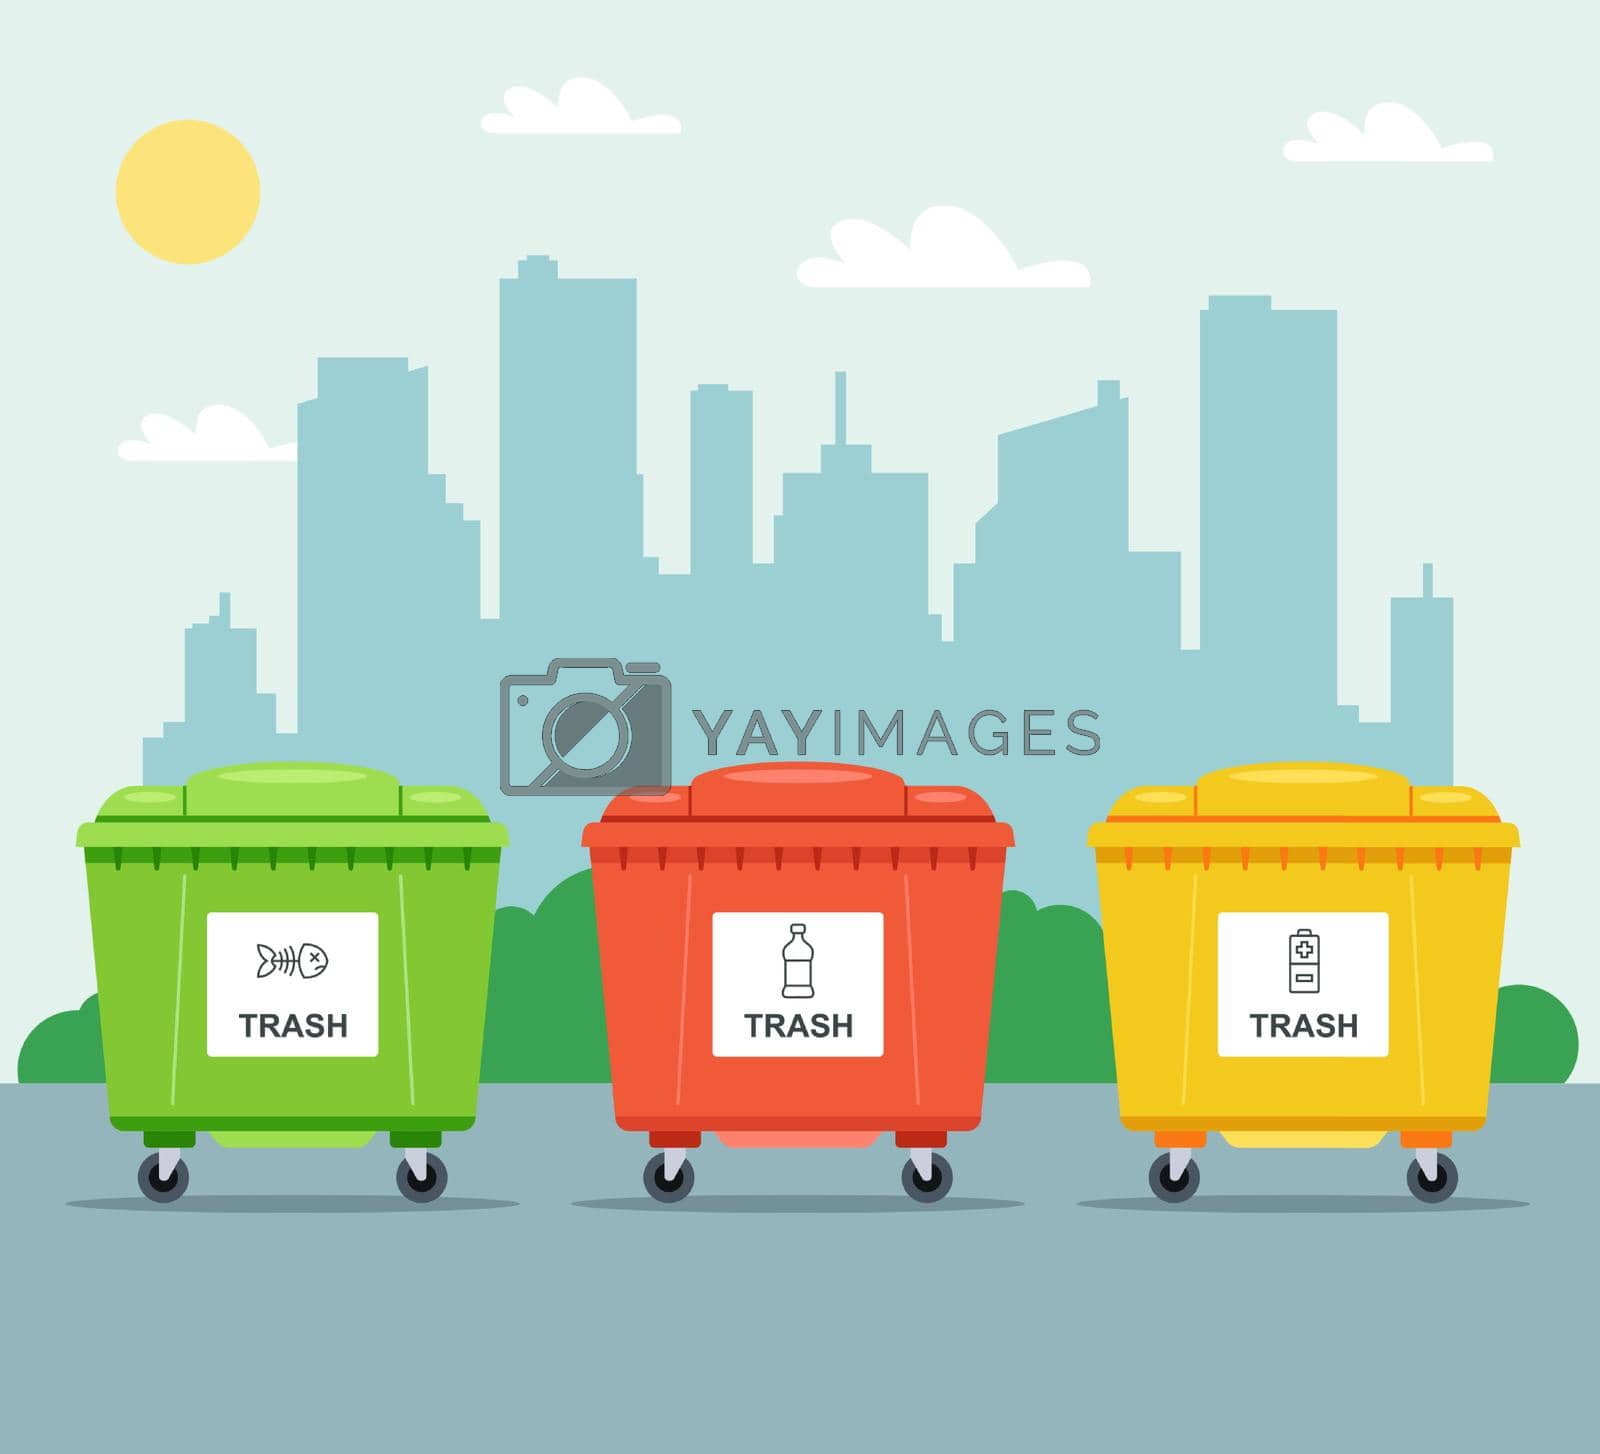 Royalty free image of multi-colored bins for separate collection of garbage on the background of the city. by PlutusART